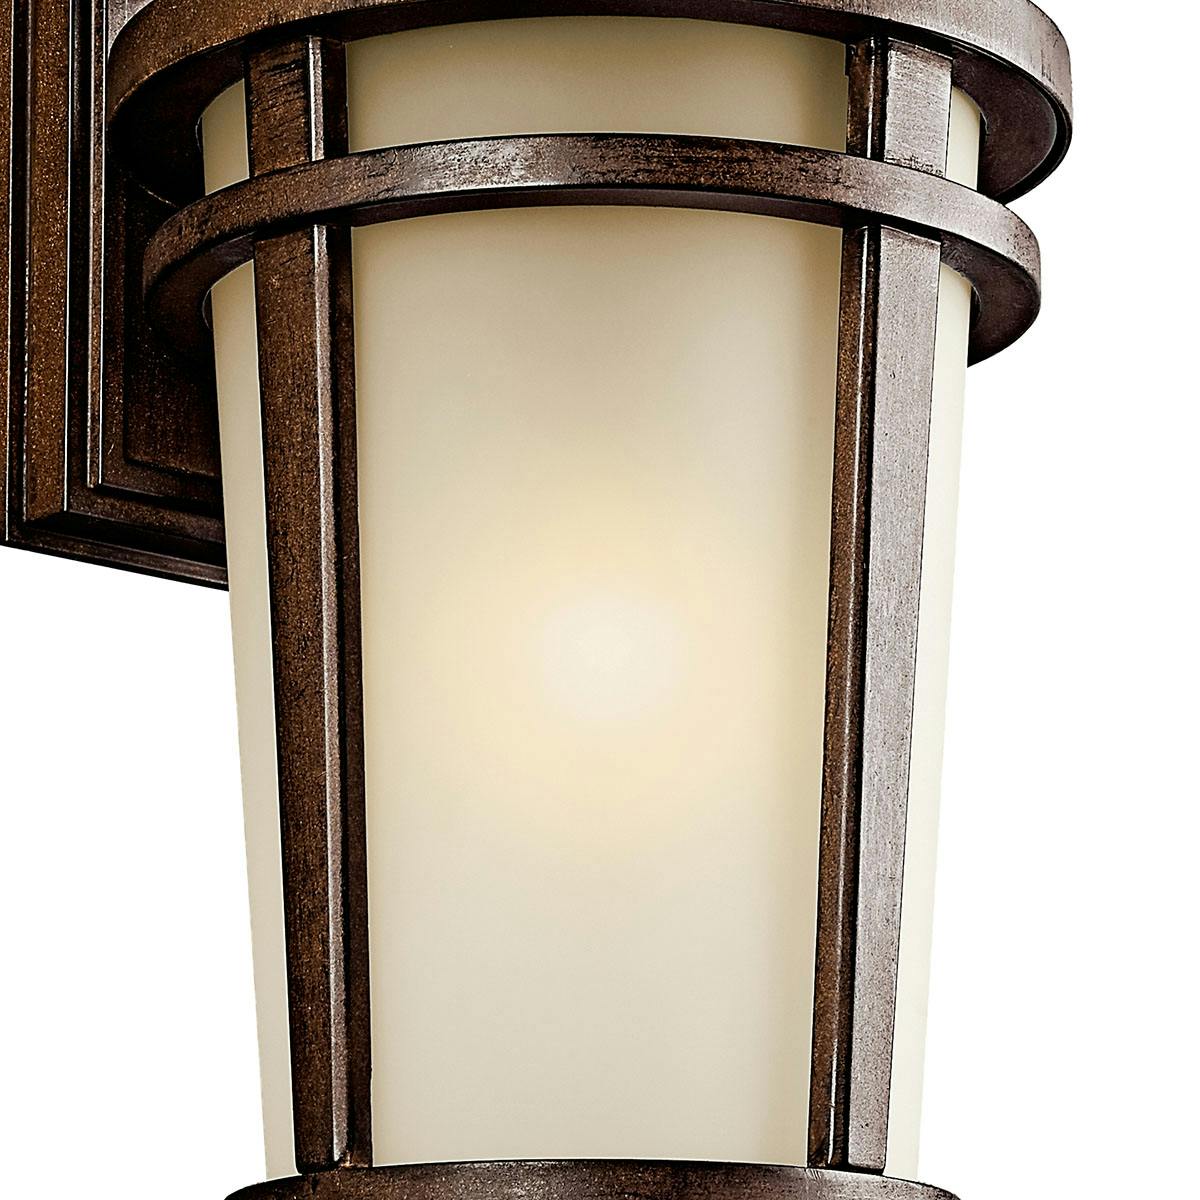 Close up view of the The Atwood 17.75" Wall Light Brown Stone on a white background